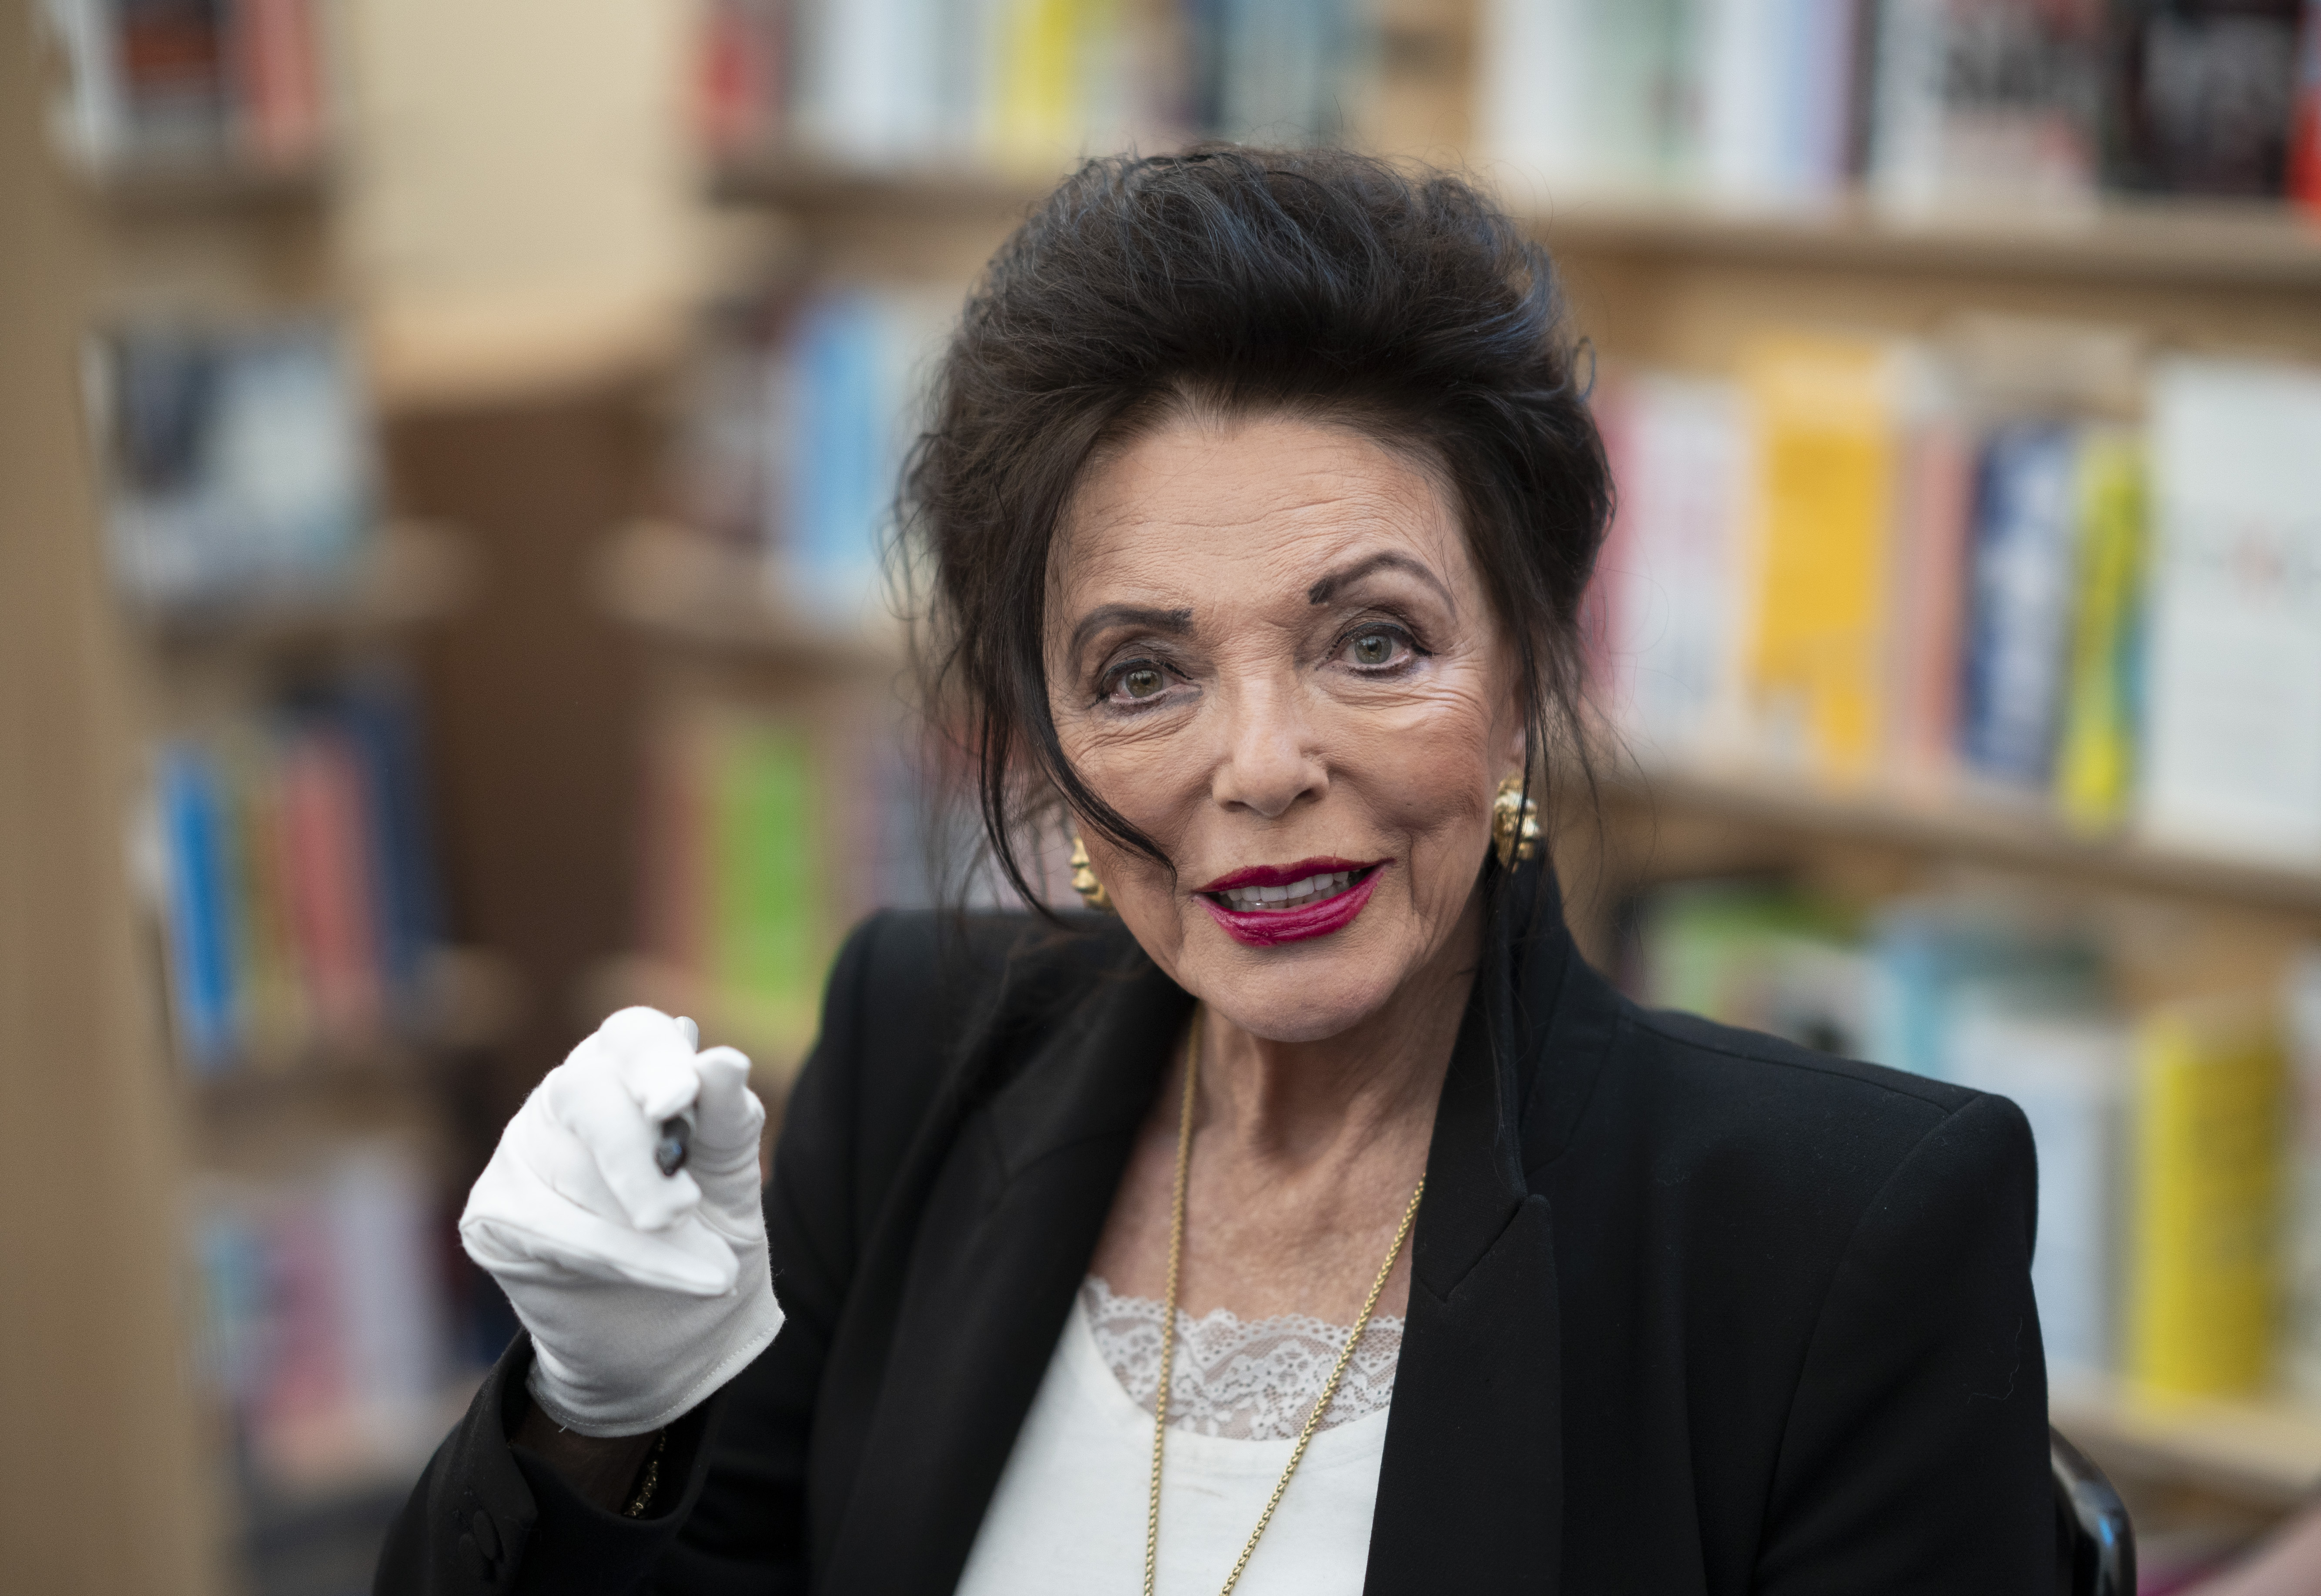 Joan Collins at a book signing of her biography "My Unapologetic Diaries" at the Cheltenham Literature Festival on October 16, 2021, in Cheltenham, England | Source: Getty Images